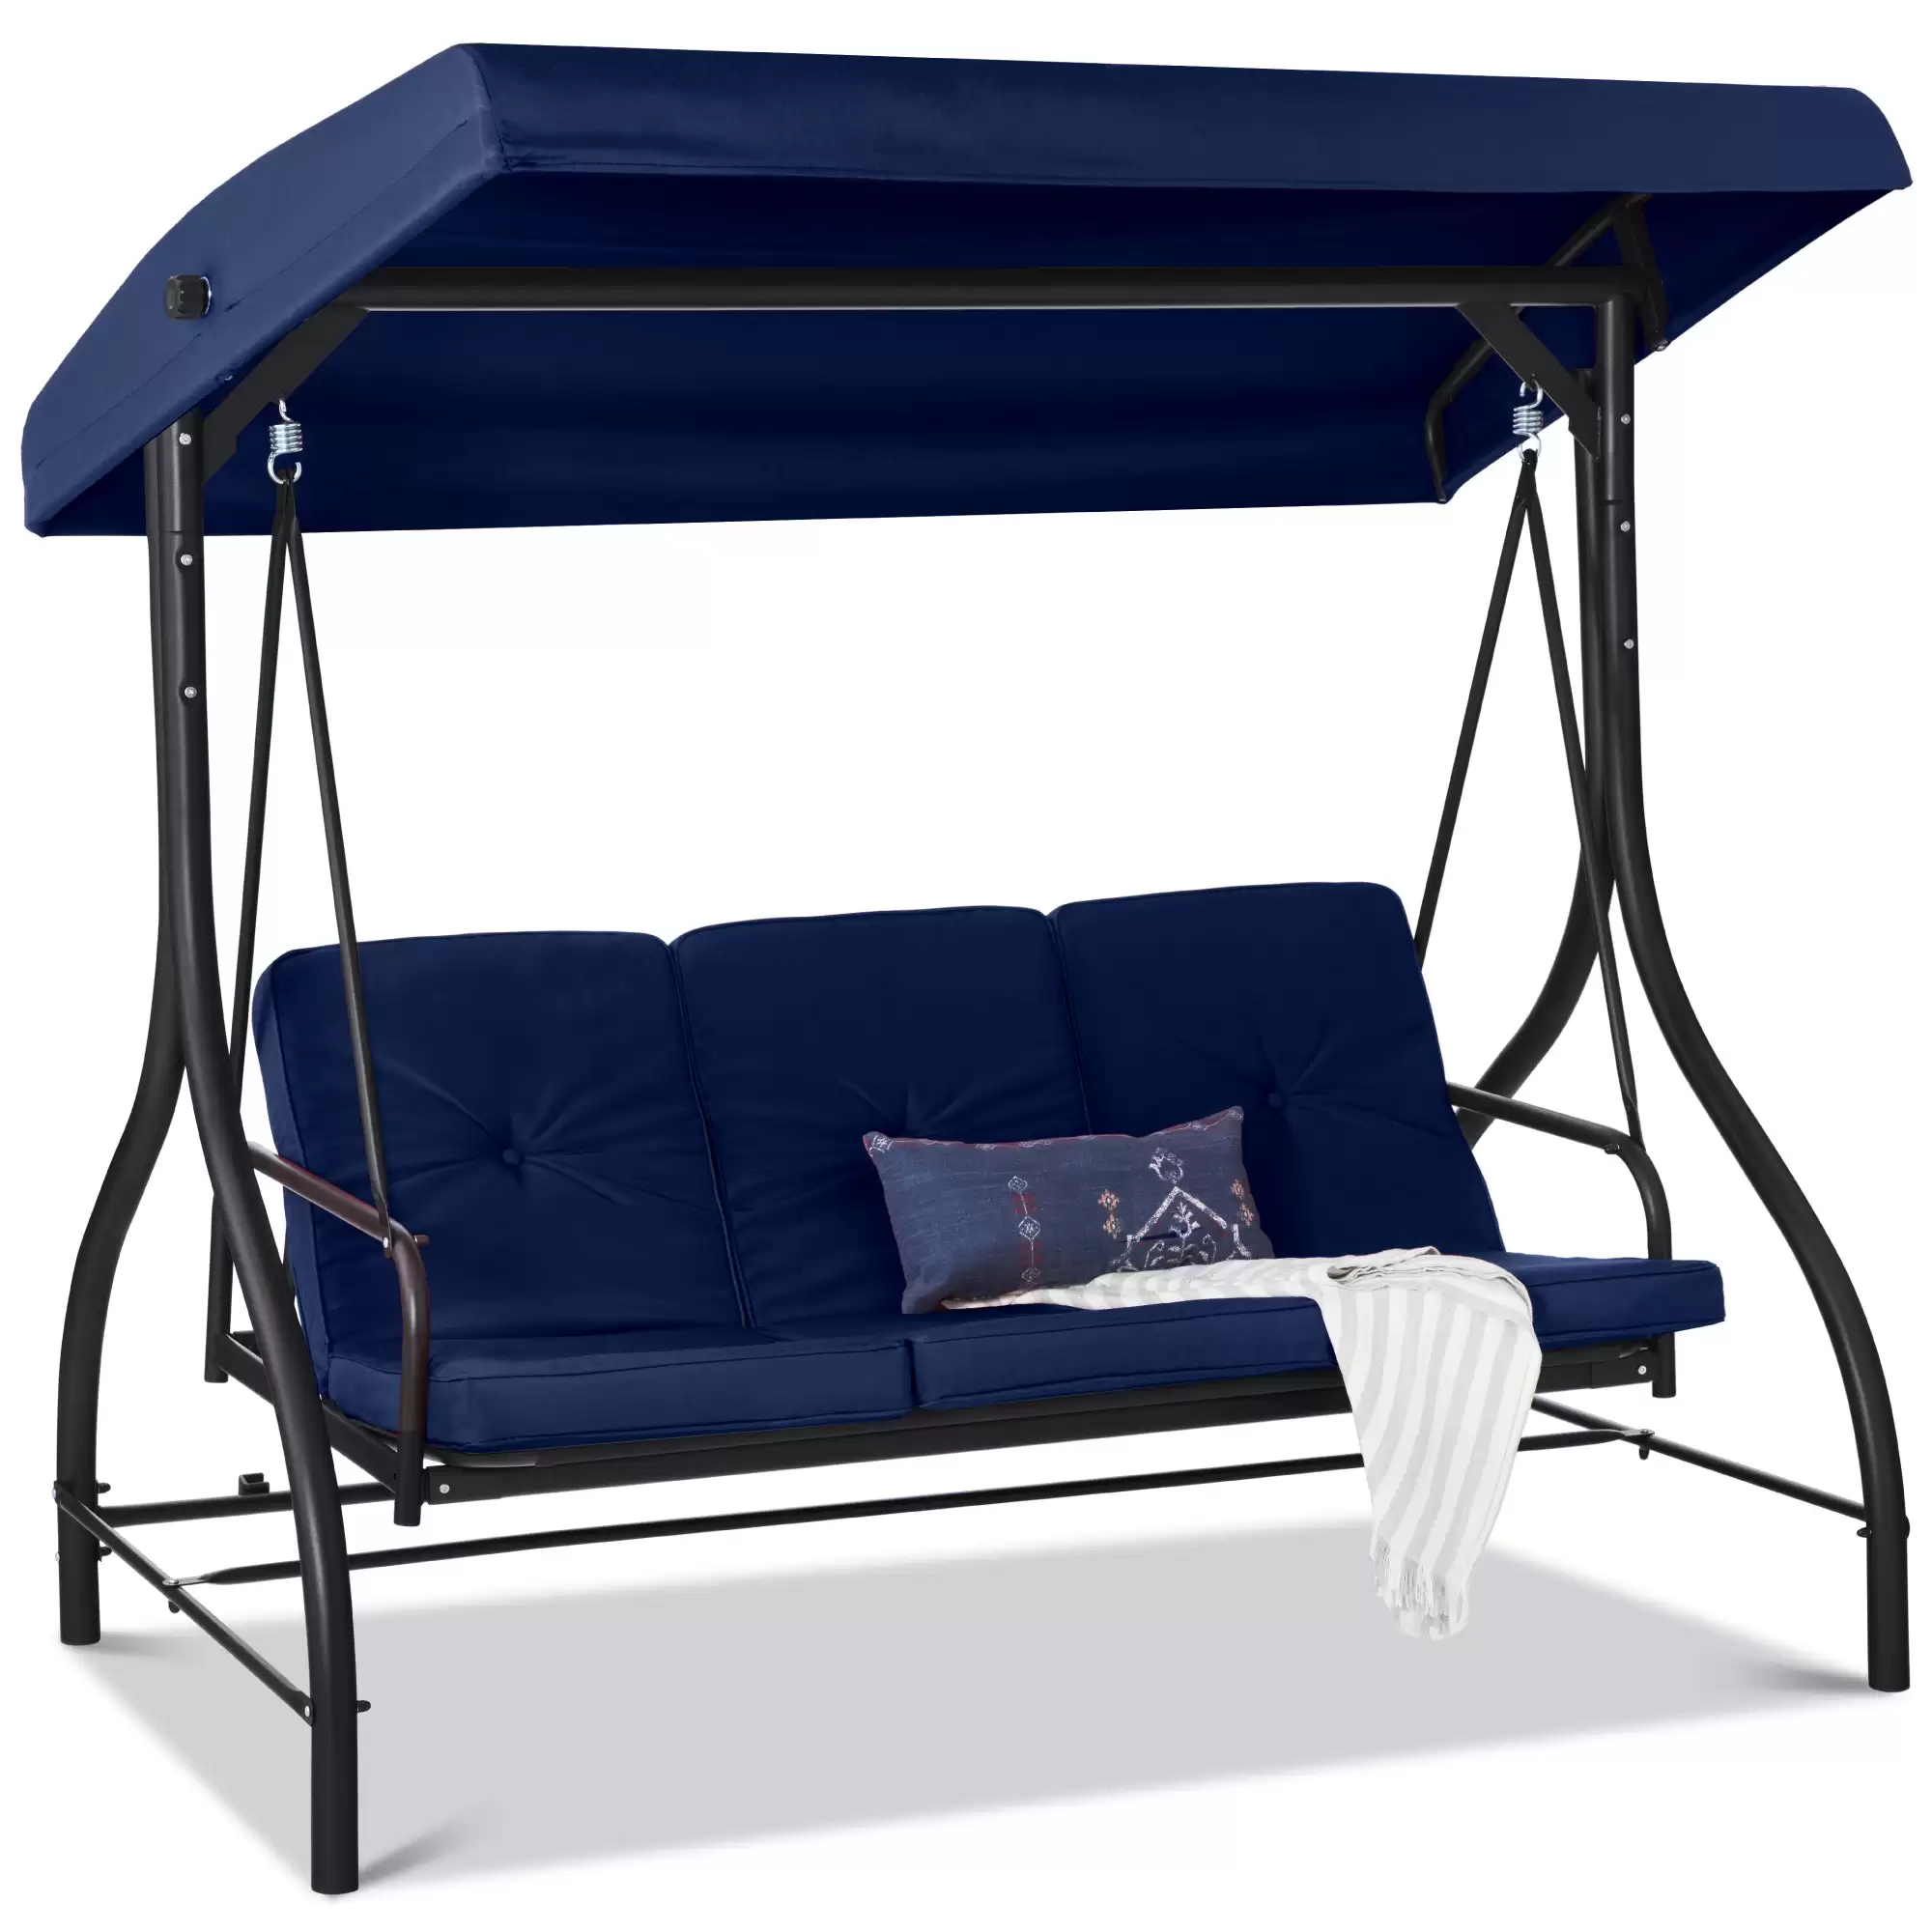 Order $239.99 3-Seat Outdoor Canopy Swing Glider Furniture W/ Converting Flatbed Backrest Using This Bestchoiceproducts Discount Code